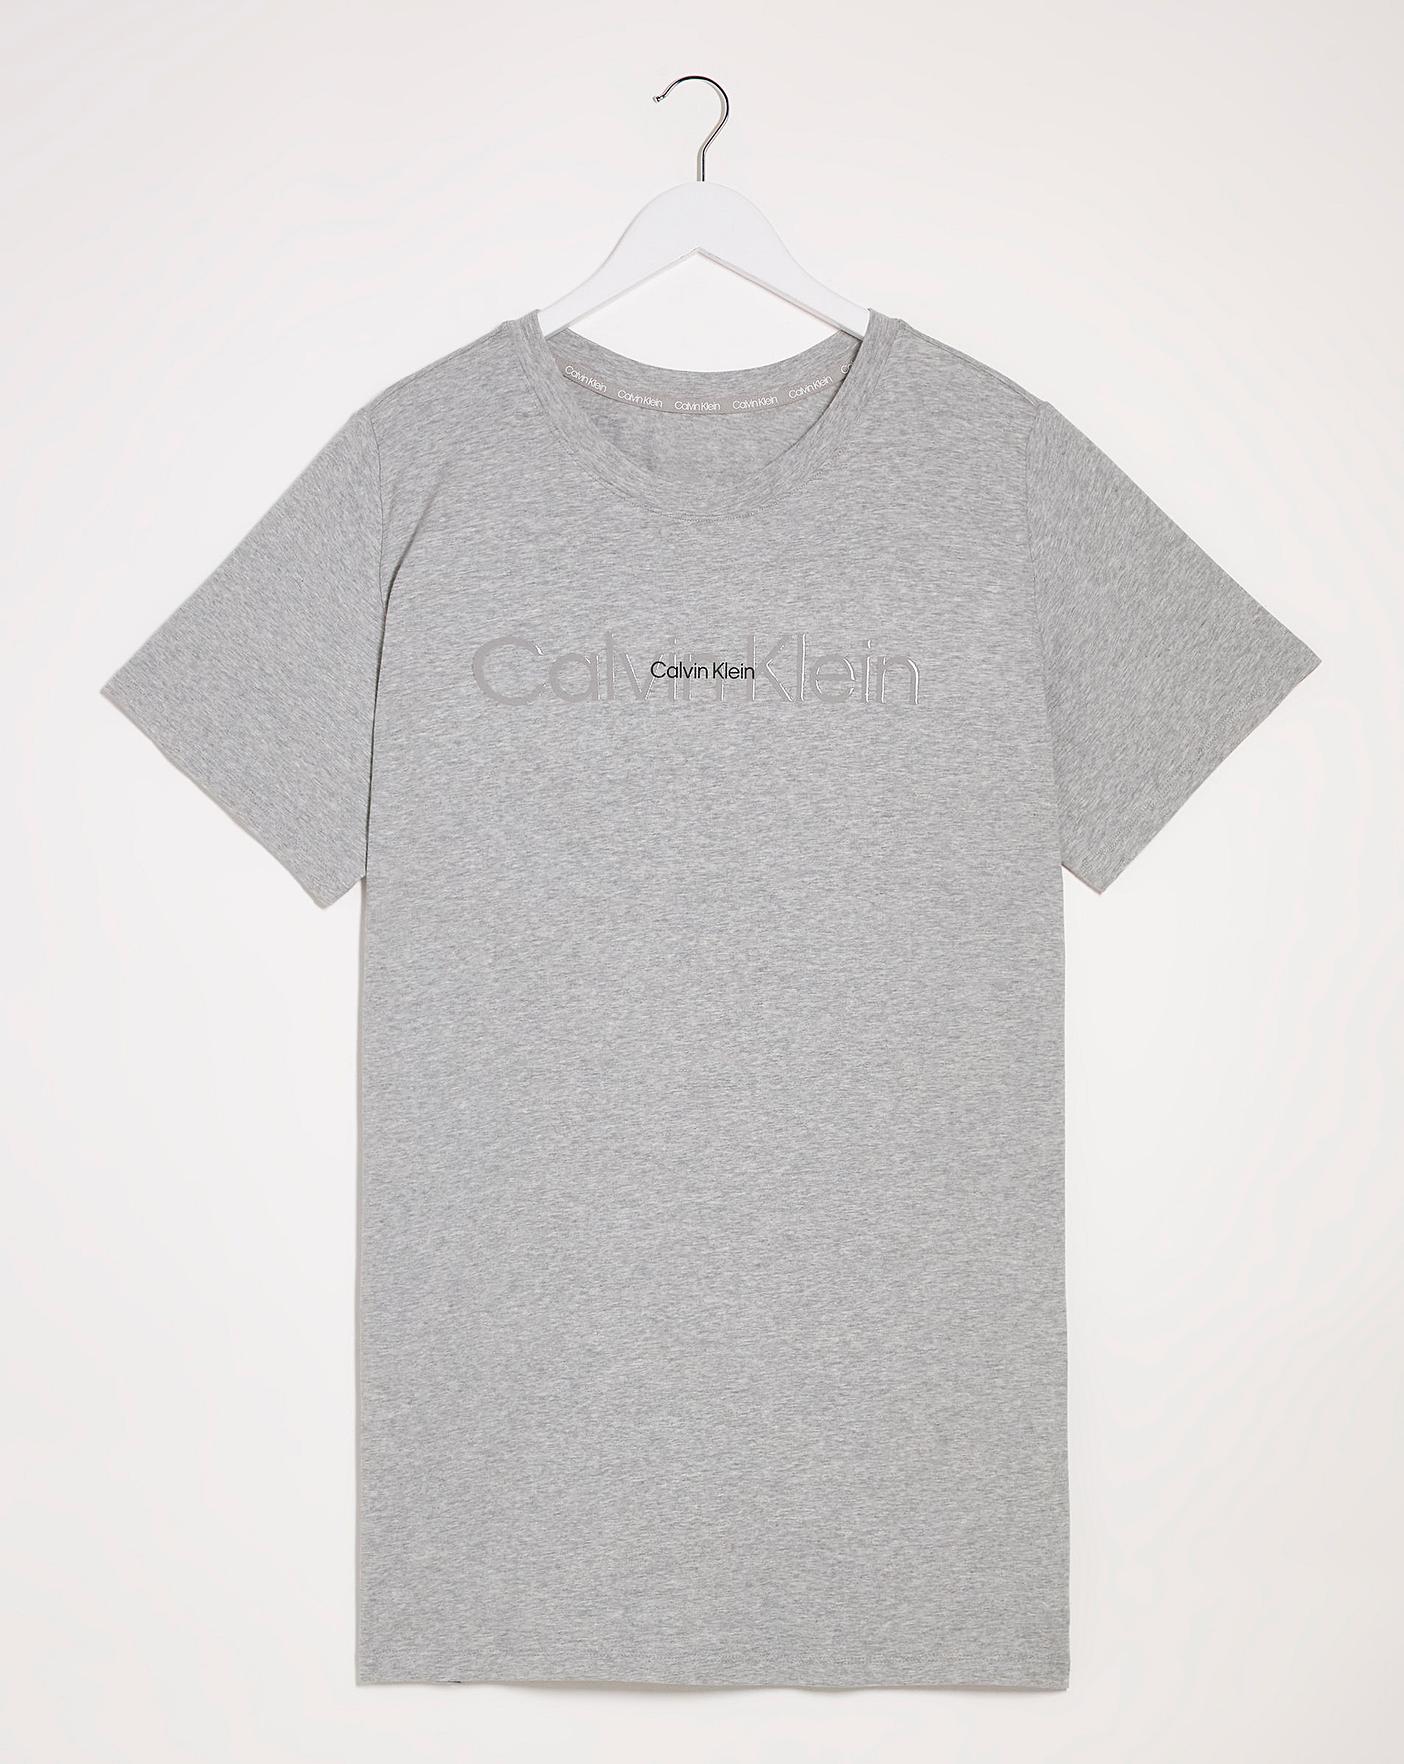 Calvin Klein - Modern Cotton is the icon. Designed with the